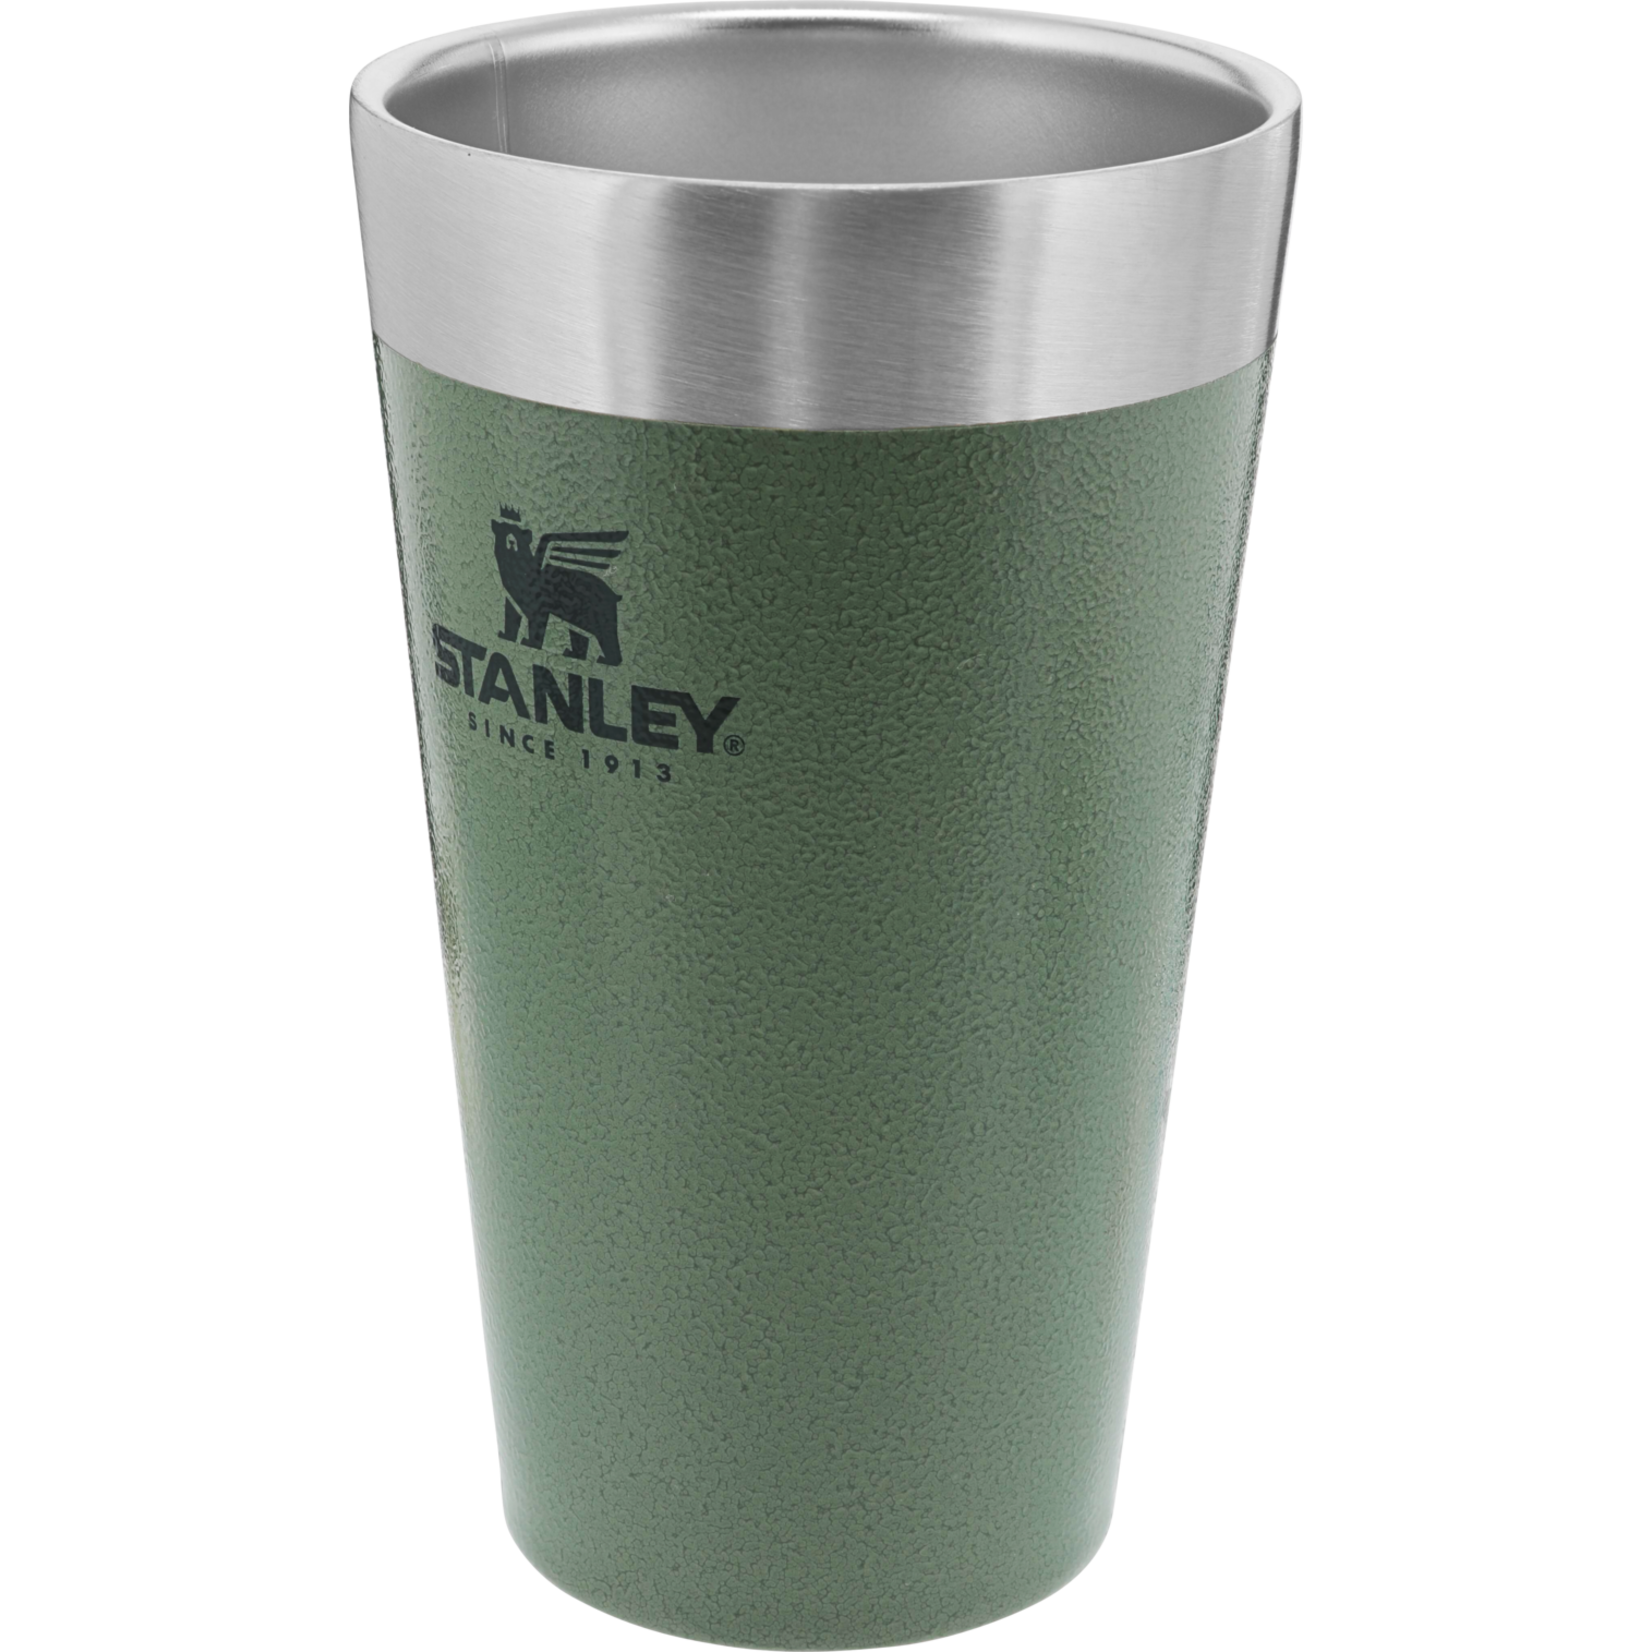 Stanley 16 oz. Pint Cup